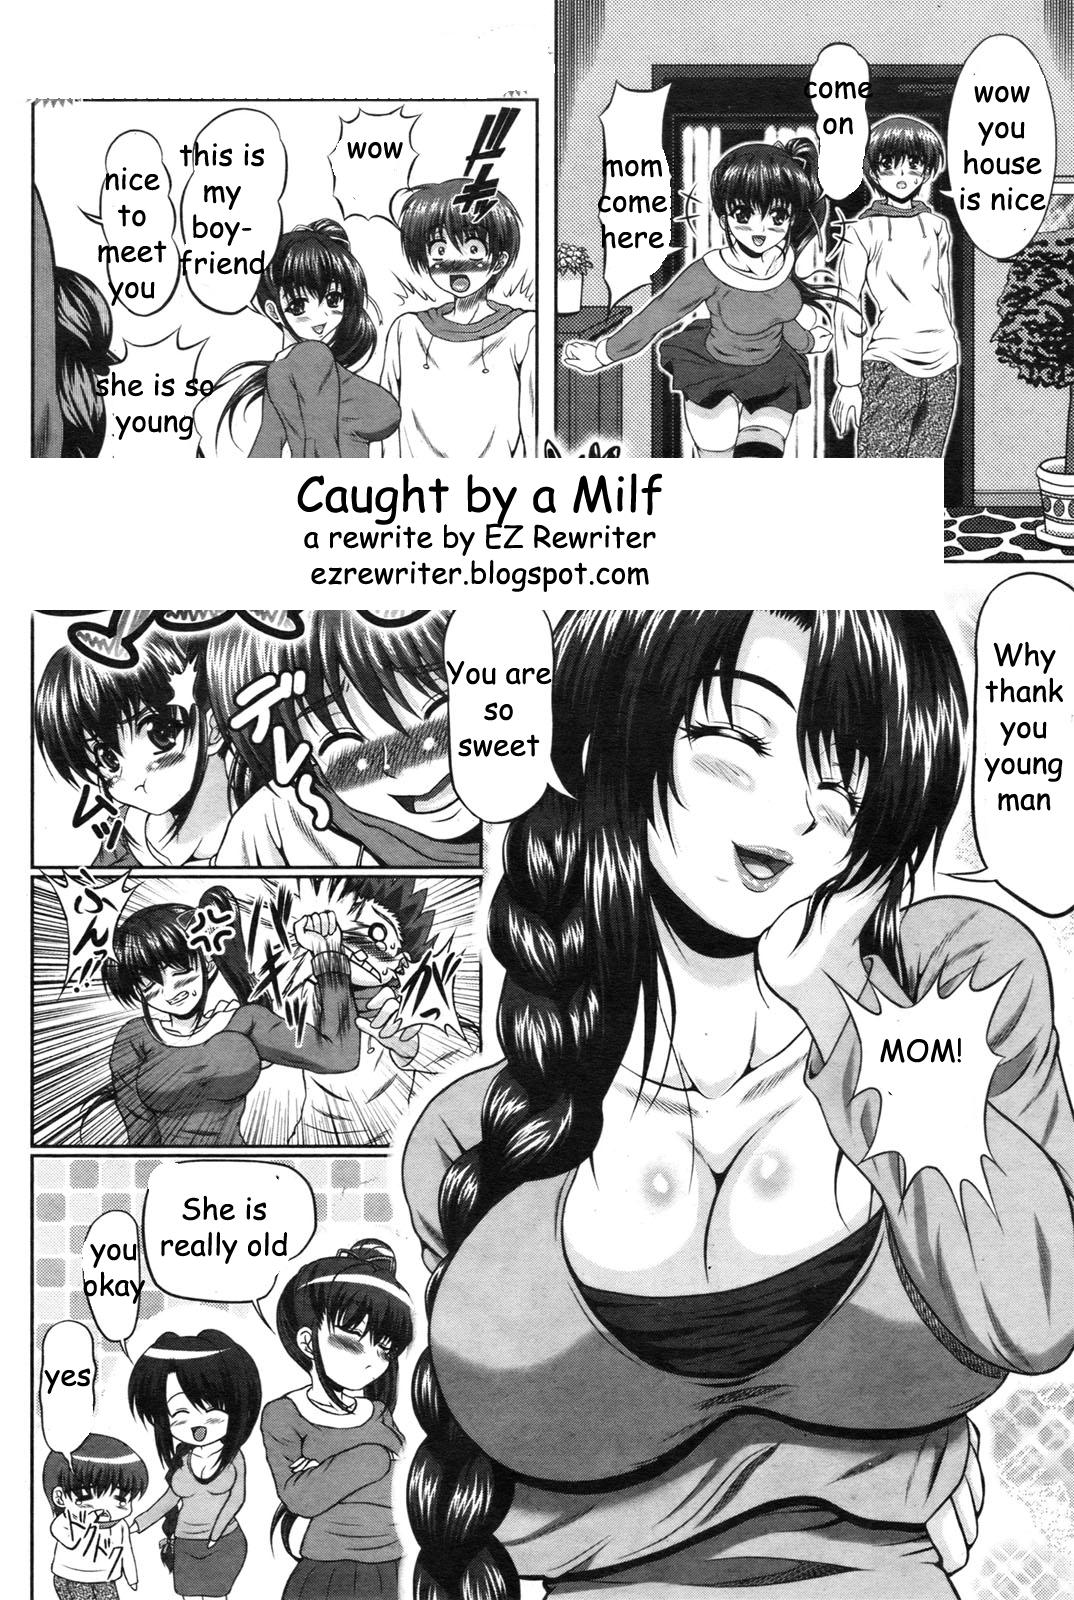 Caught by a Milf 1